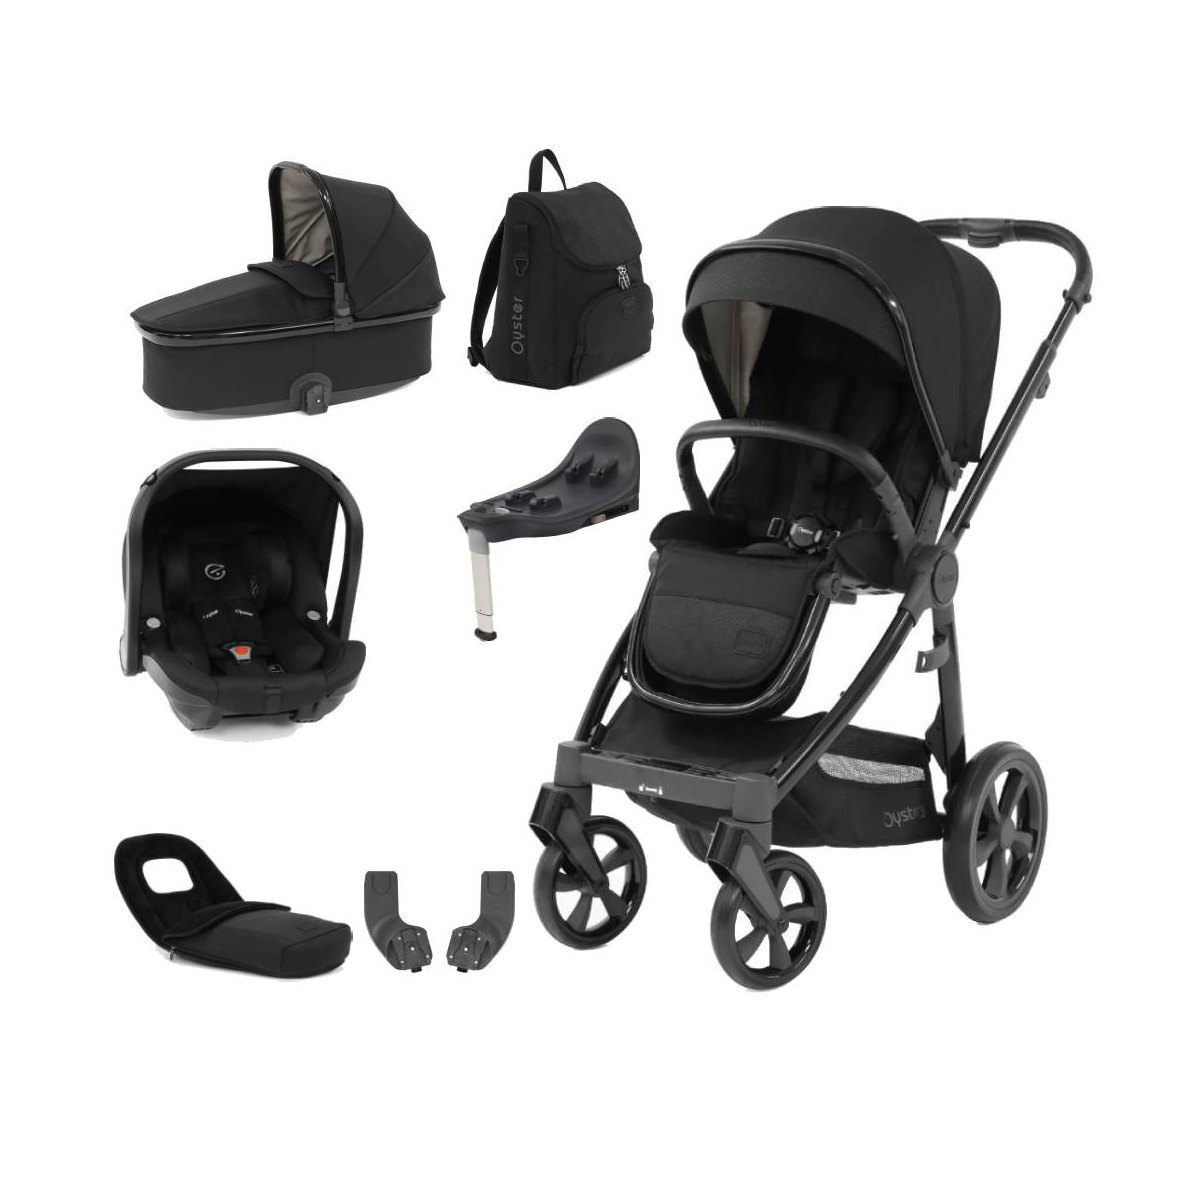 BabyStyle Oyster 3 Gloss Black Chassis Edition 7 Piece Luxury Travel System